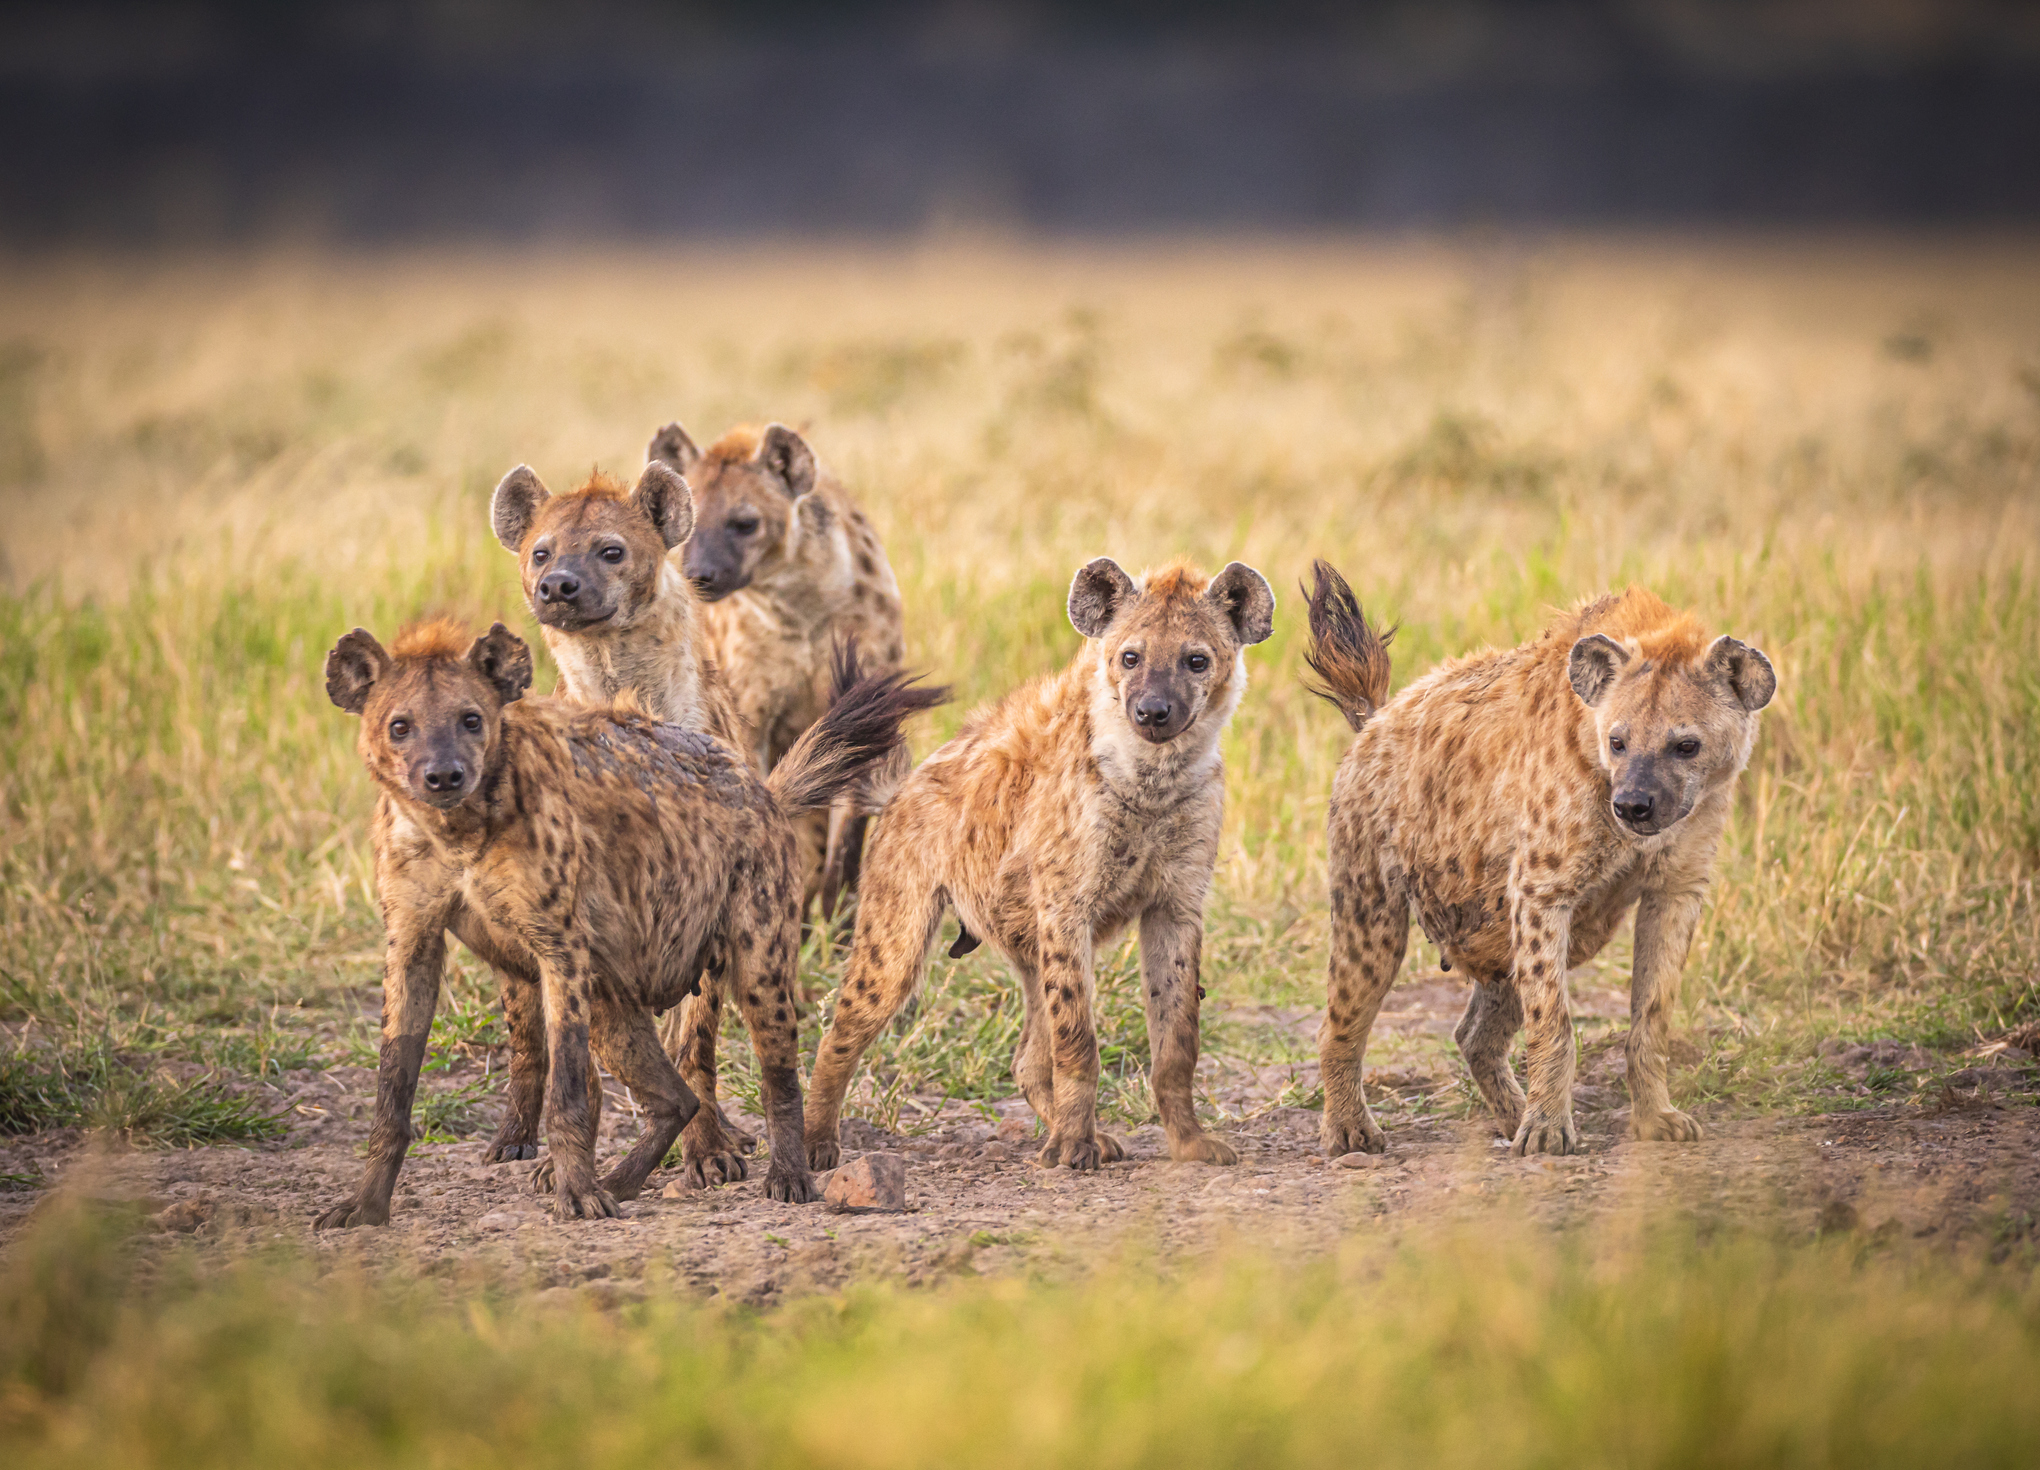 Medical Fiction: Dr. Chad Henry and the Hungry Hyenas